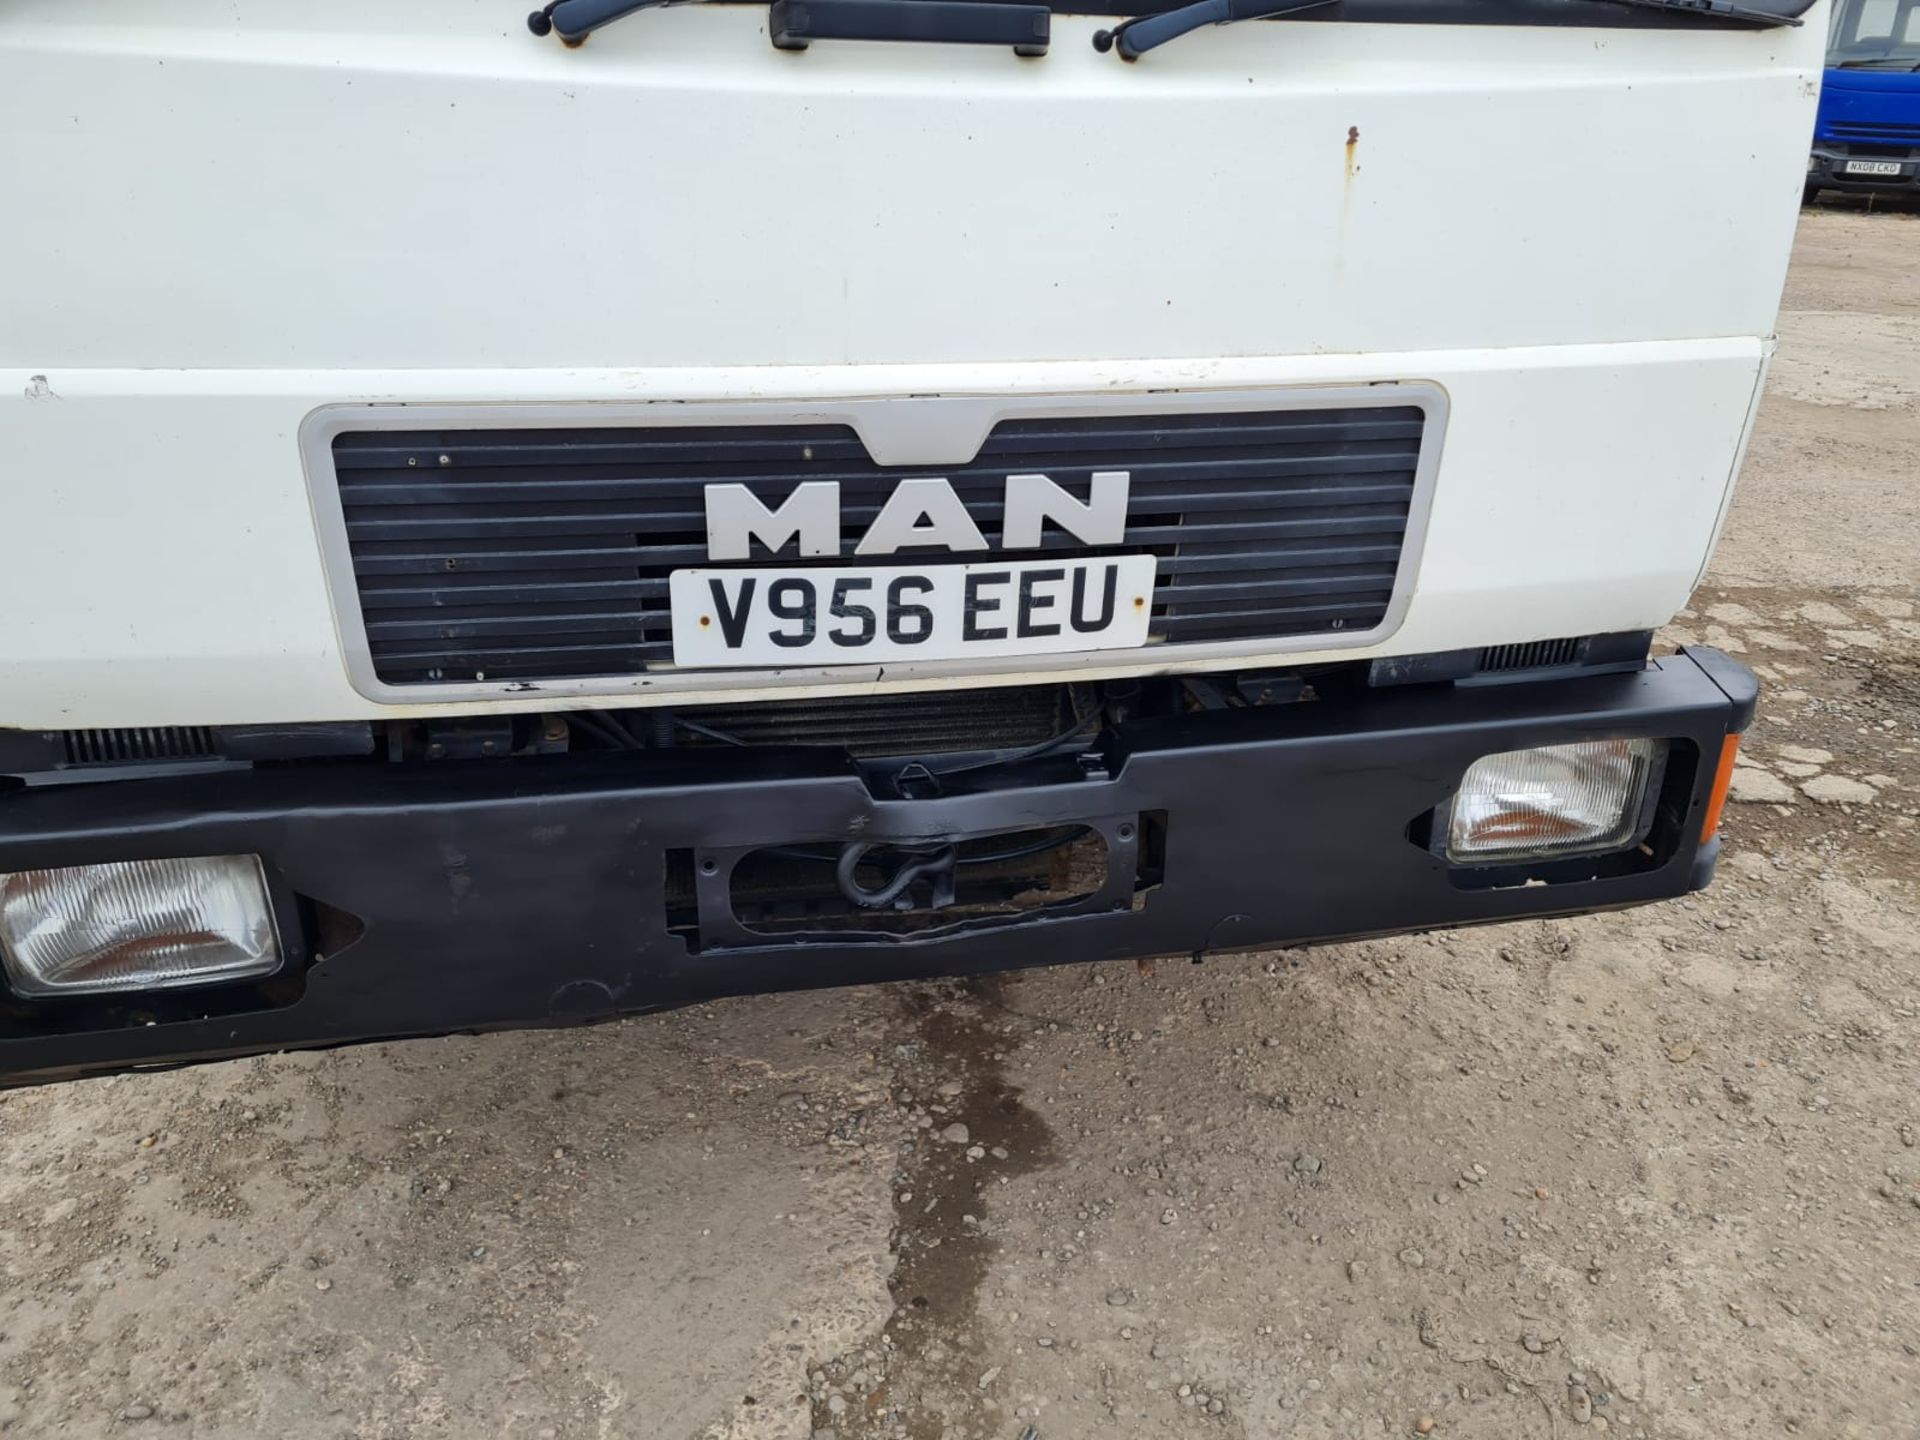 1999 man le8 tipper - Image 2 of 11